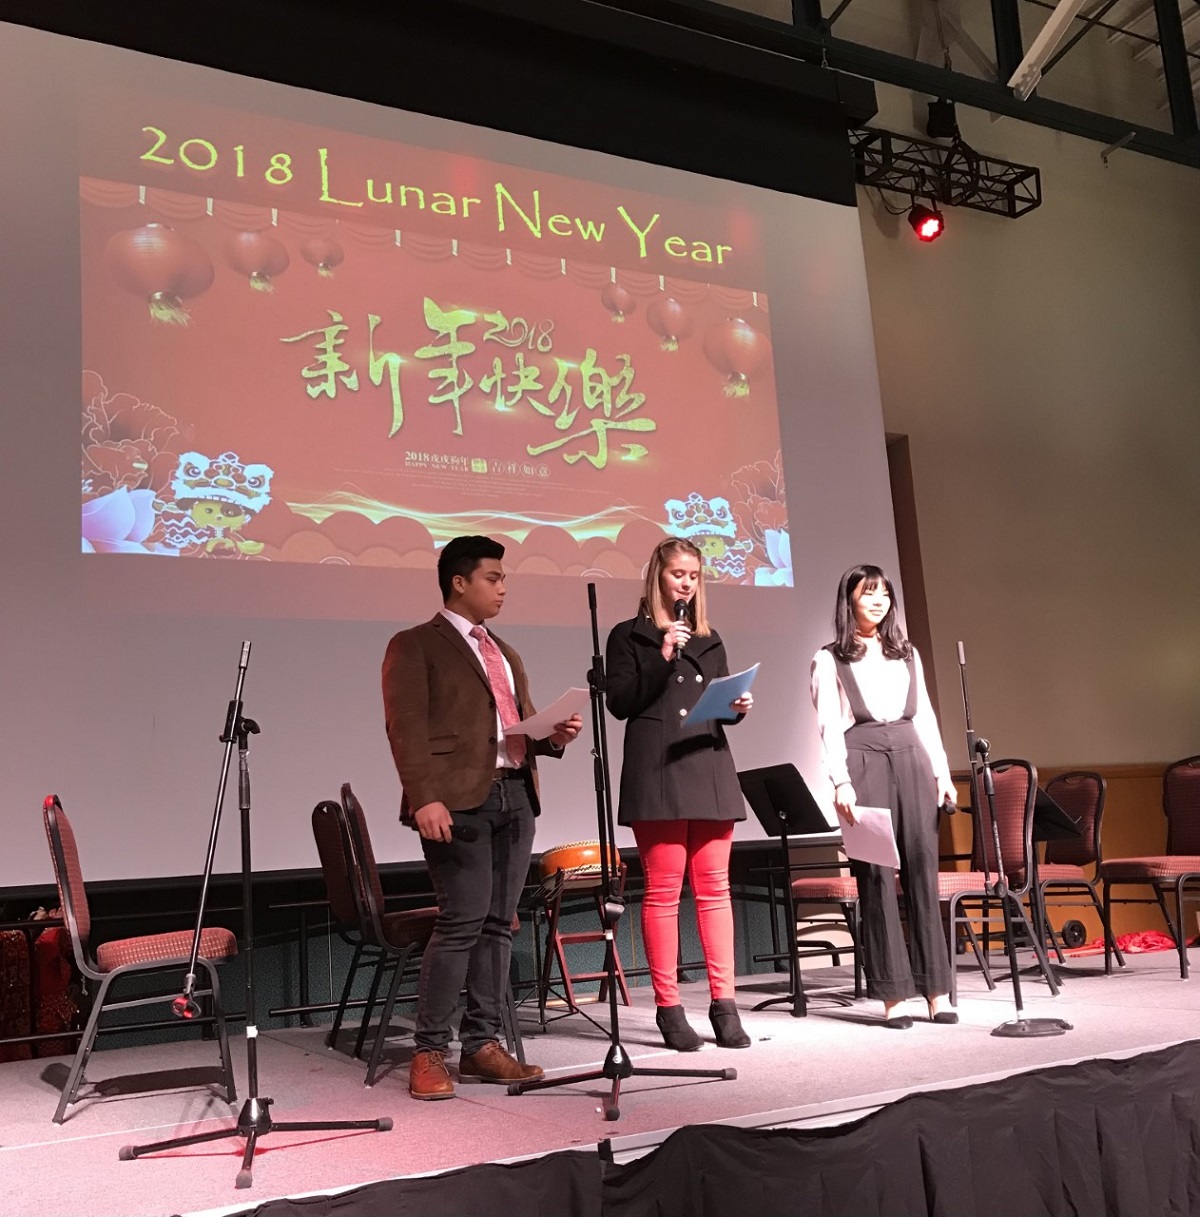 Three students on stage, speaking into a microphone and standing in front of a projection screen with a slide that says "2018 Lunar New Year" in English and Chinese 